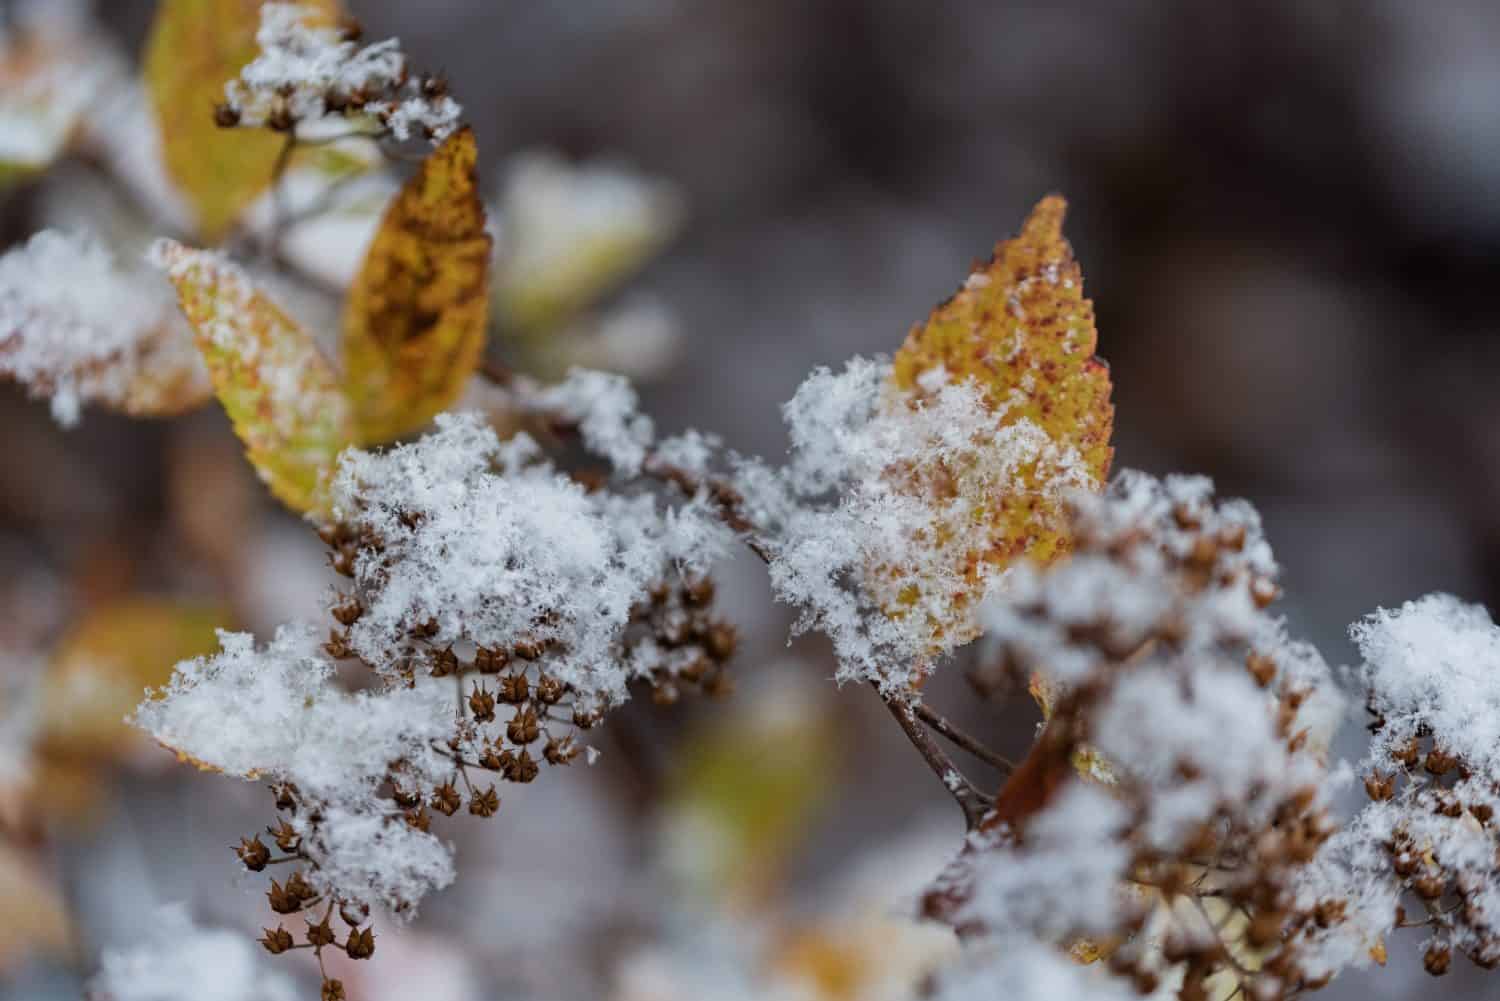 The first snow on the plants in the garden. Autumn weather. Snowflakes on green plant leaves. The change of seasons and cooling down in heat.